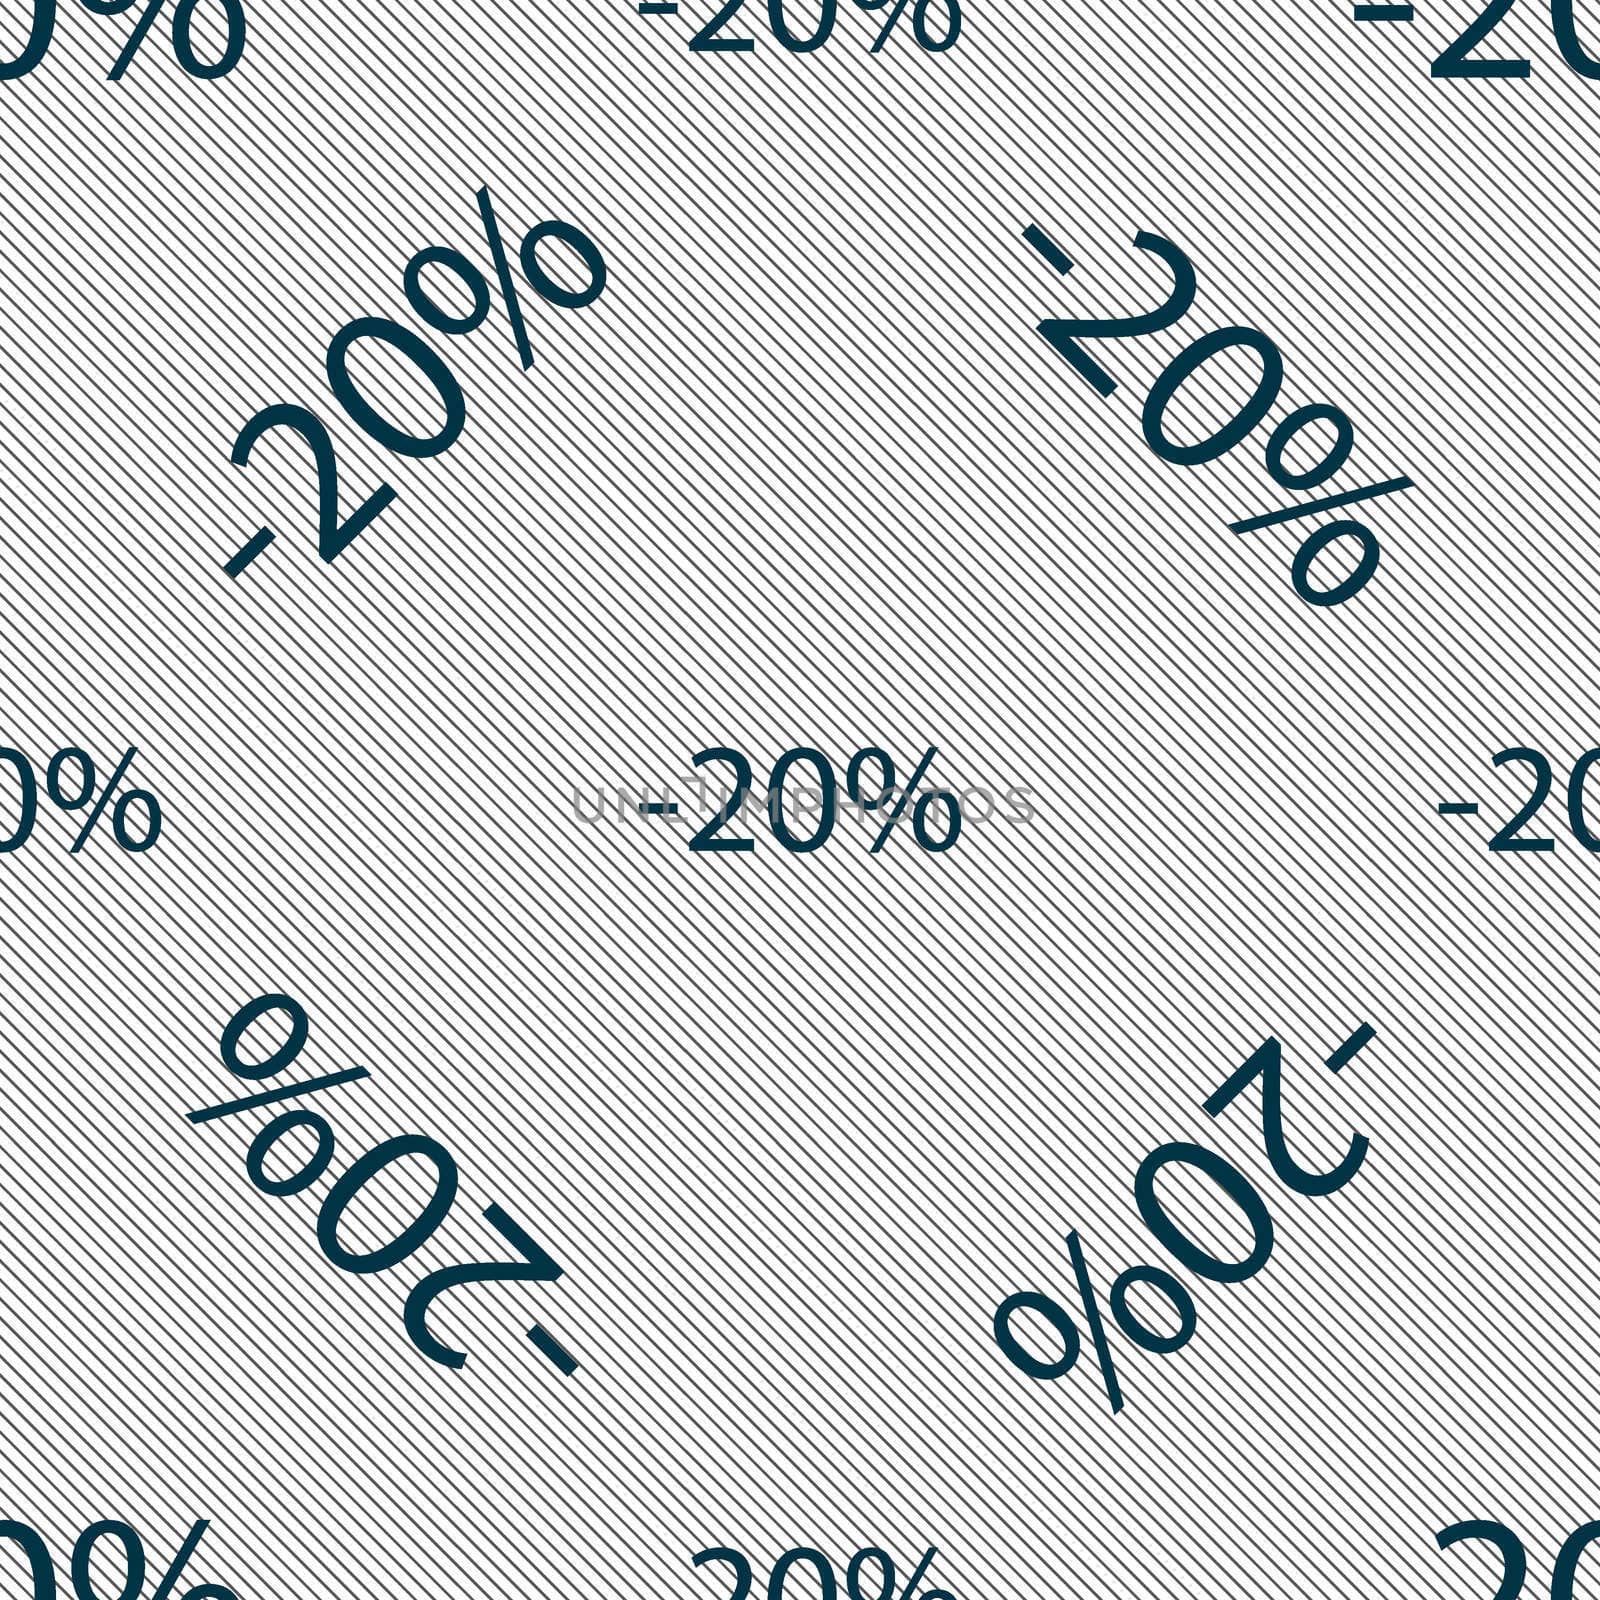 20 percent discount sign icon. Sale symbol. Special offer label. Seamless pattern with geometric texture. illustration